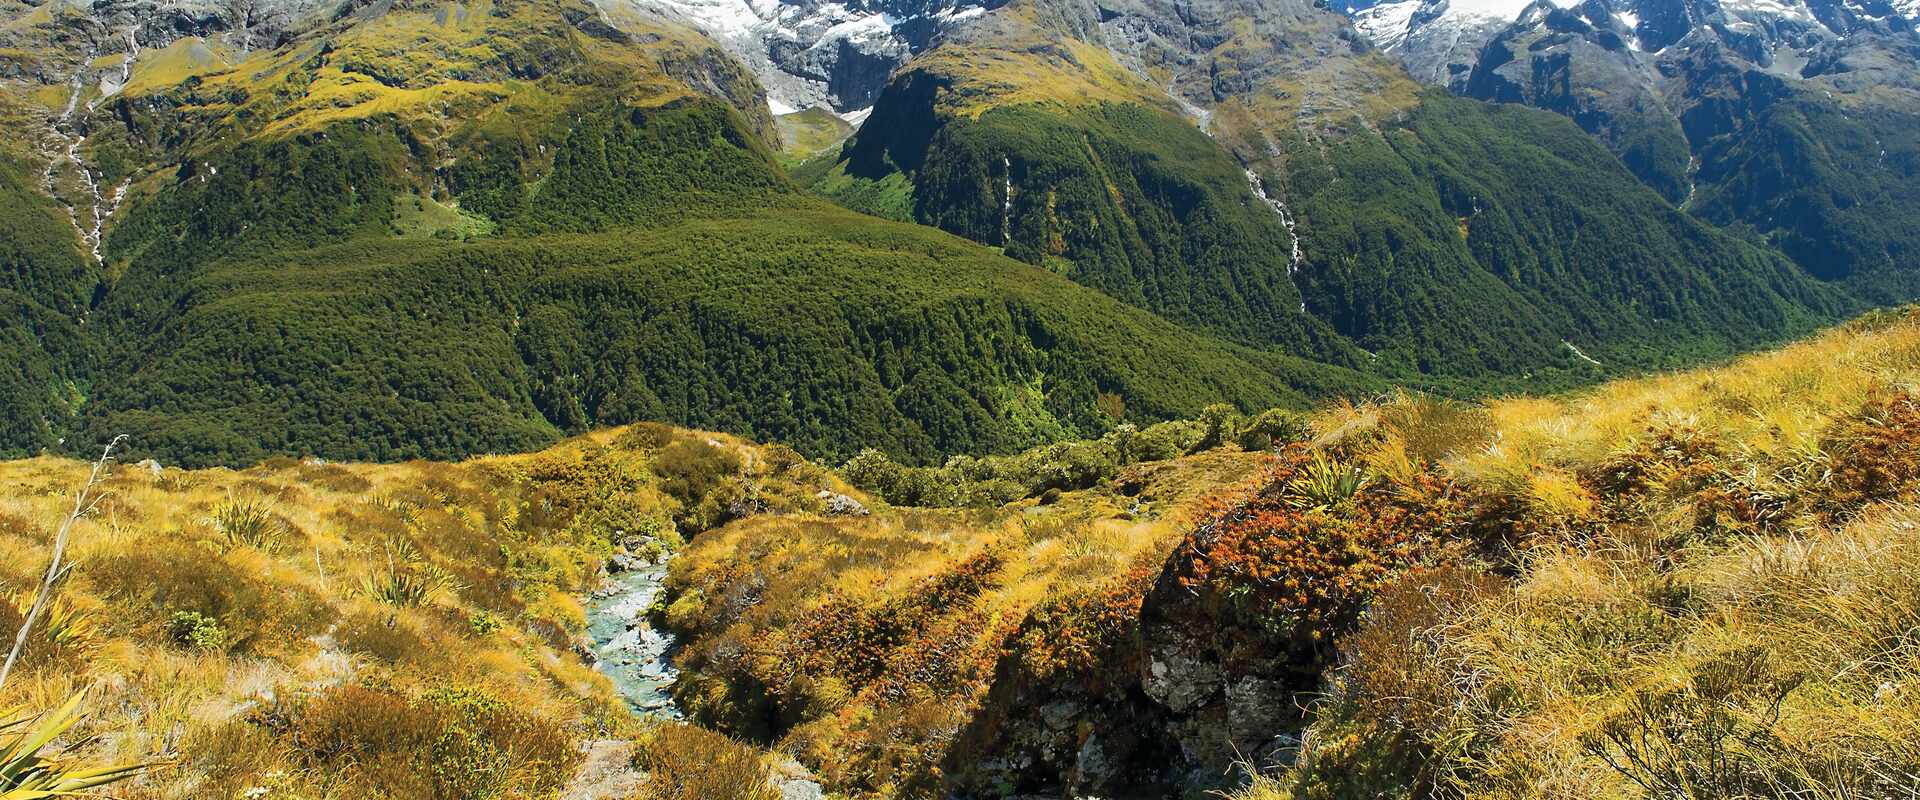 mountains up cloase in fiordland national park south island new zealand